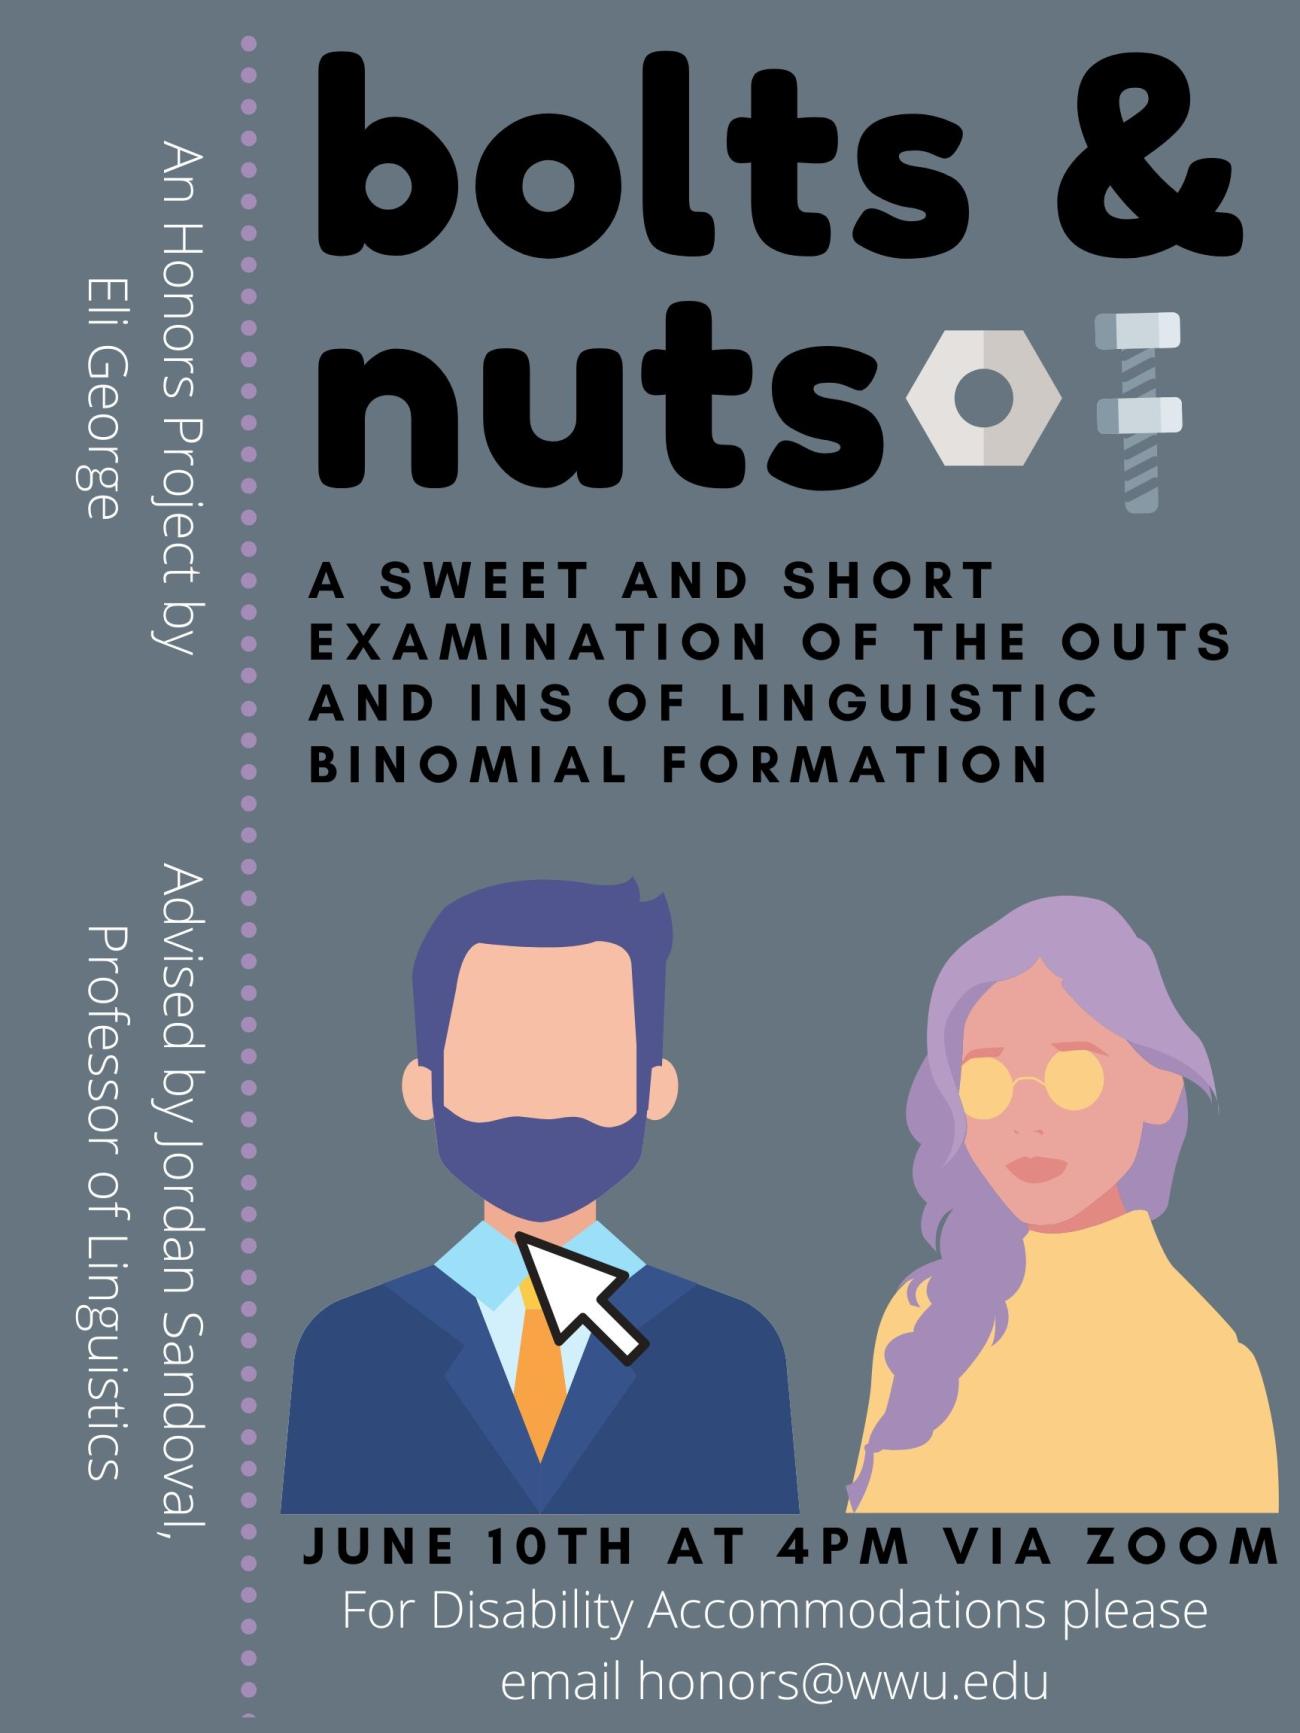 Image: a Clip Art image of a man and woman on a gray background, with a computer cursor hovering over the man.  In the corner is Clip Art of a mechanical and hardware nut.  Text:  "Bolts & Nuts: A sweet and short examination of the outs and ins of linguistic binomial formation.  An Honors Project by Eli George,  Advised by Jordan Sandoval, Professor of Linguistics.  June 10th a 4pm via Zoom. For Disability Accommodations please email honors@wwu.edu."